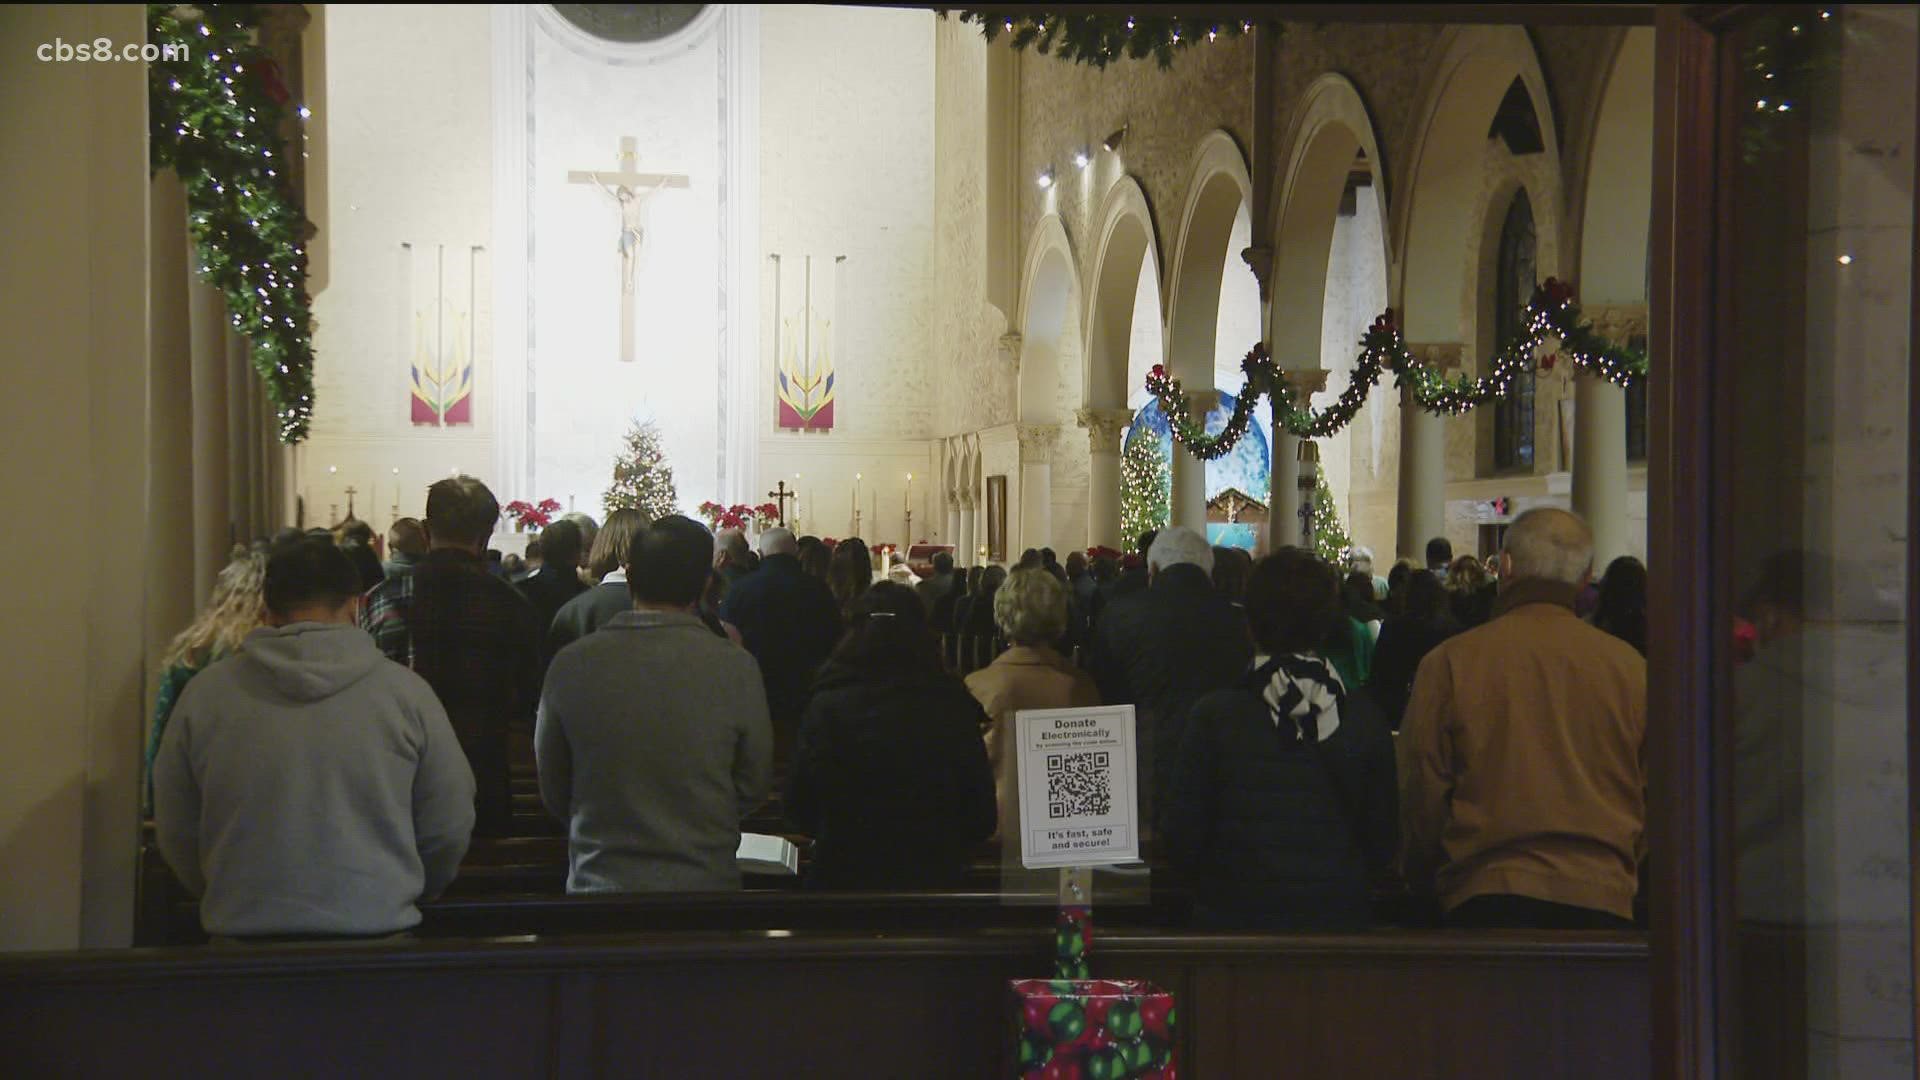 San Diegans attended virtual and in-person church services on Friday, Dec. 24 to celebrate Christmas.